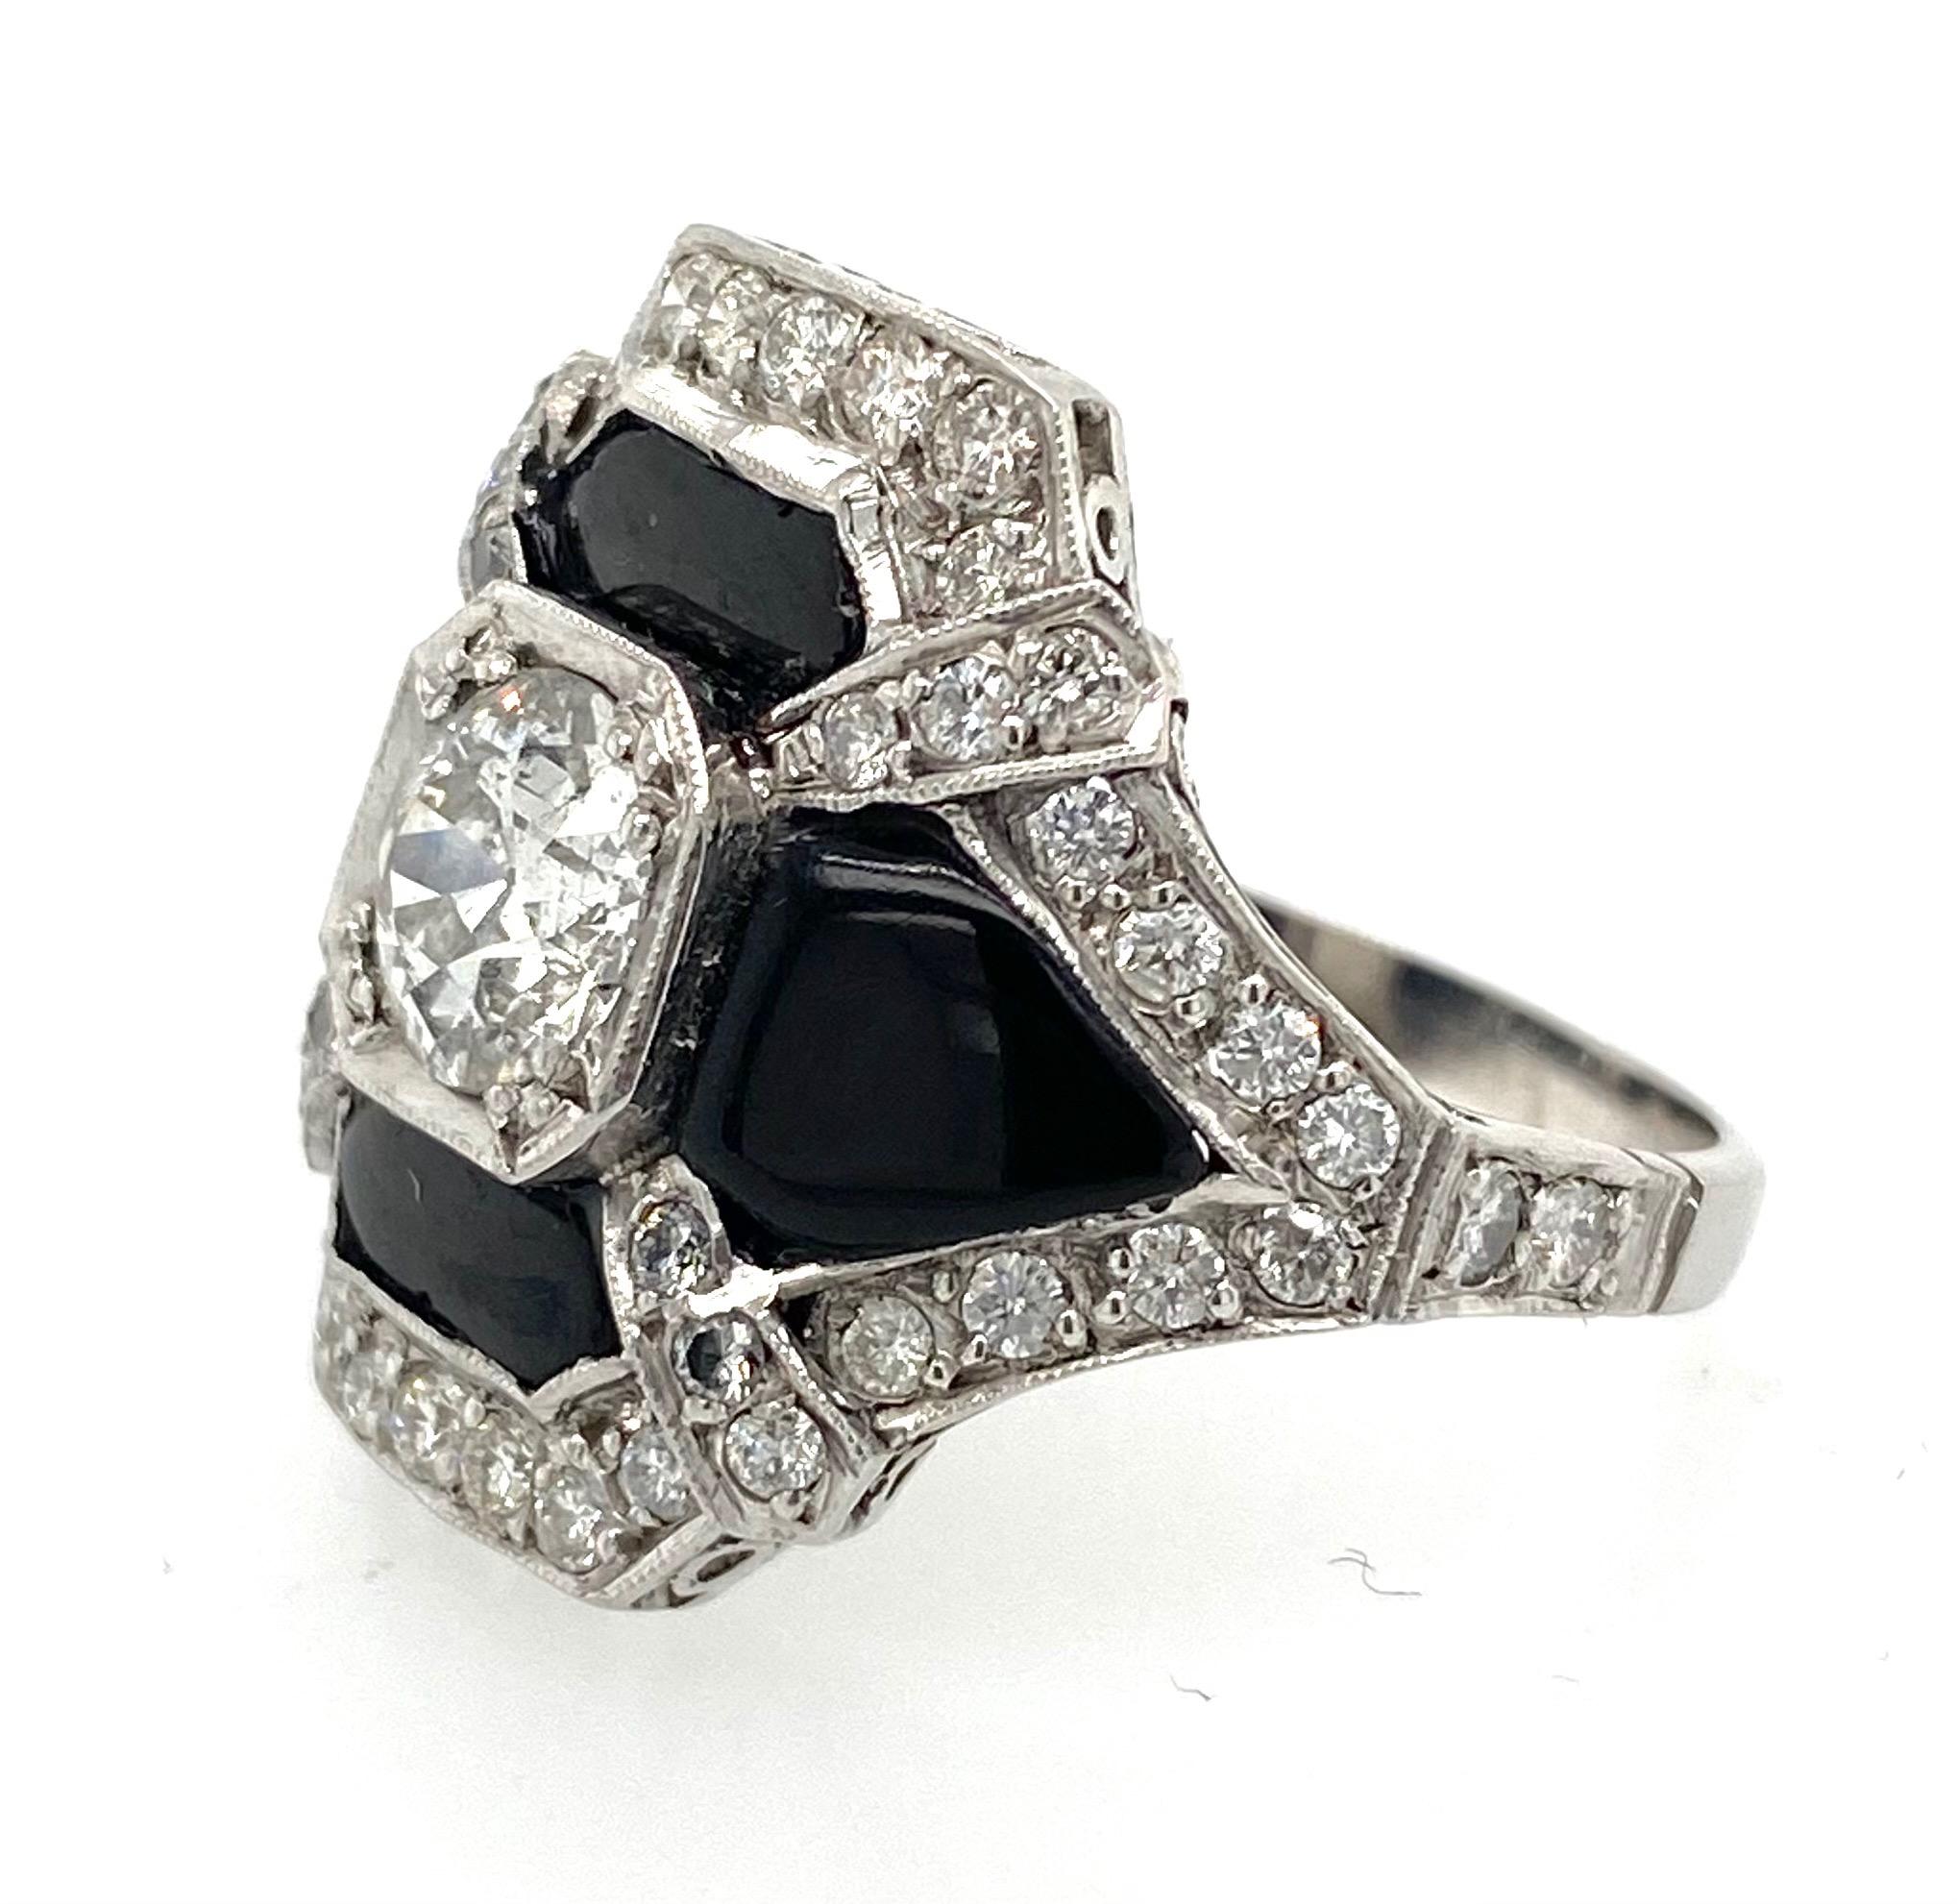 This Art Deco ring is a stunning example of vintage jewelry. The ring features a gorgeous 1.10 carat Old European Cut diamond in the center, which is surrounded by 1.38 carats of dazzling diamond accents. The diamonds are set in a Pt900 (platinum)